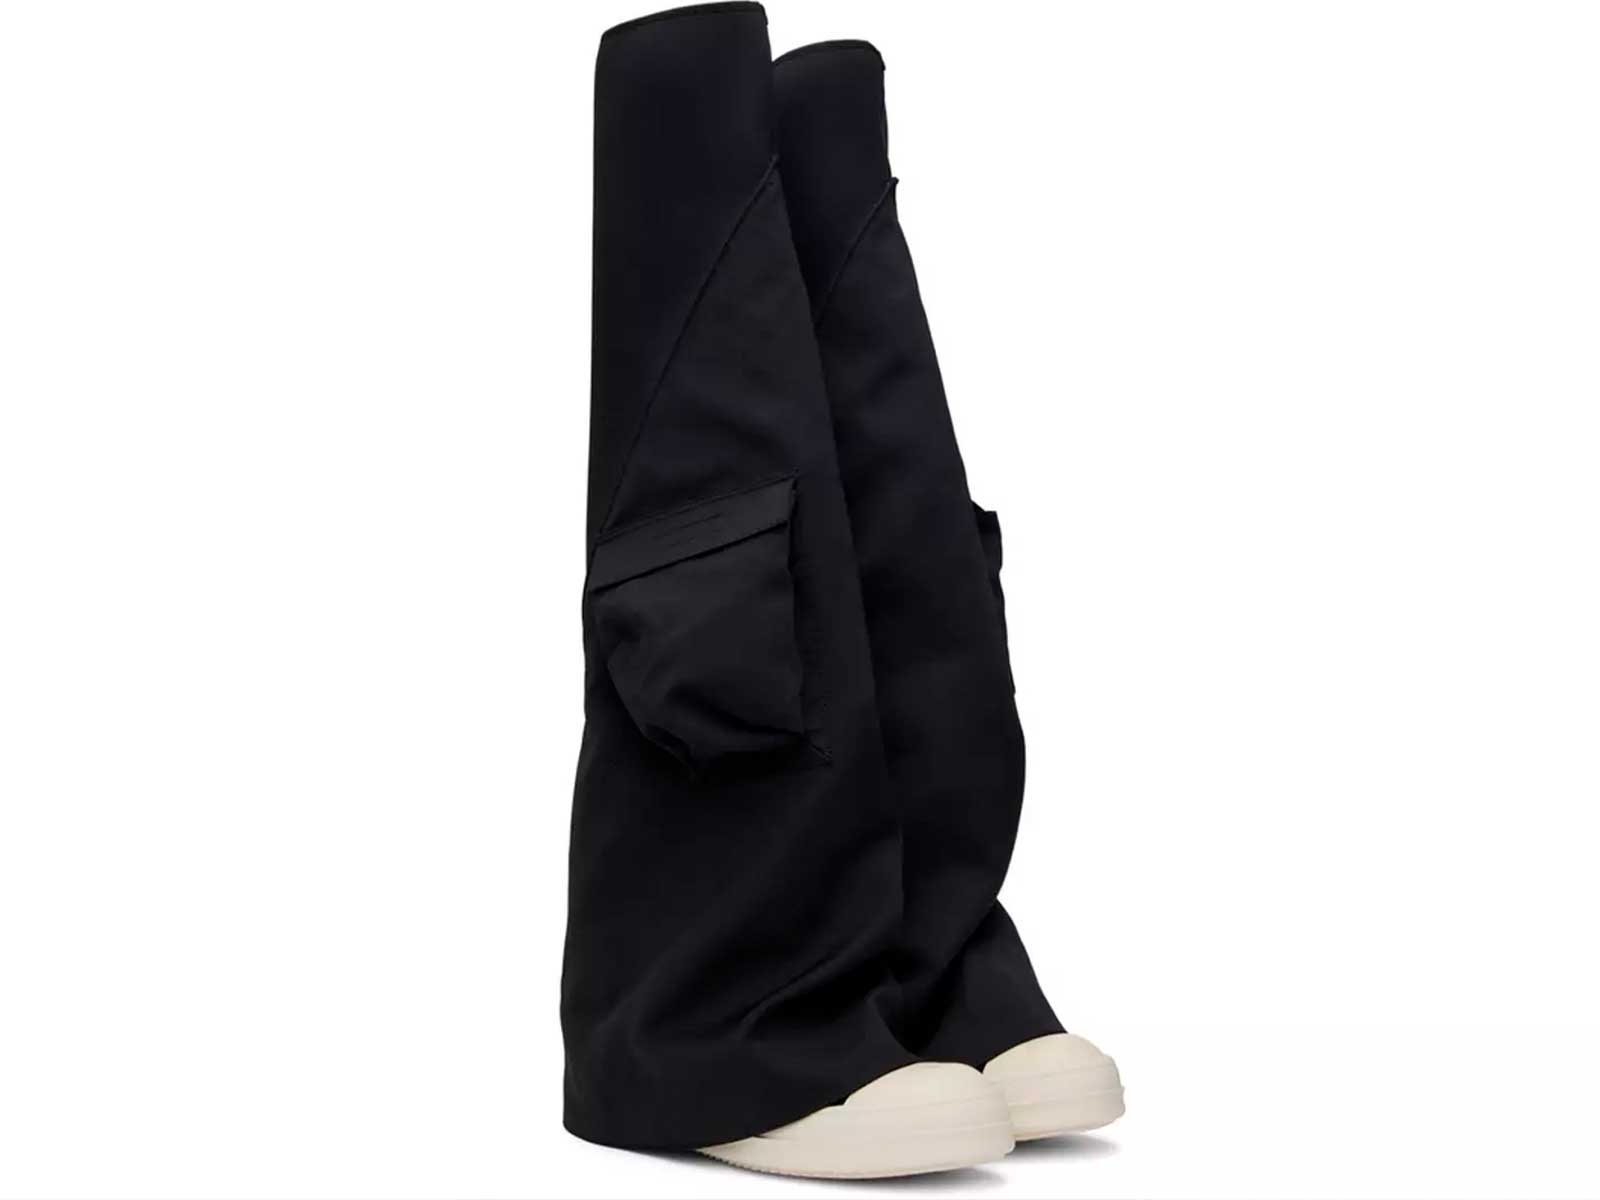 Rick Owens DRKSHDW Cargo Fetish boots are both pants and footwear